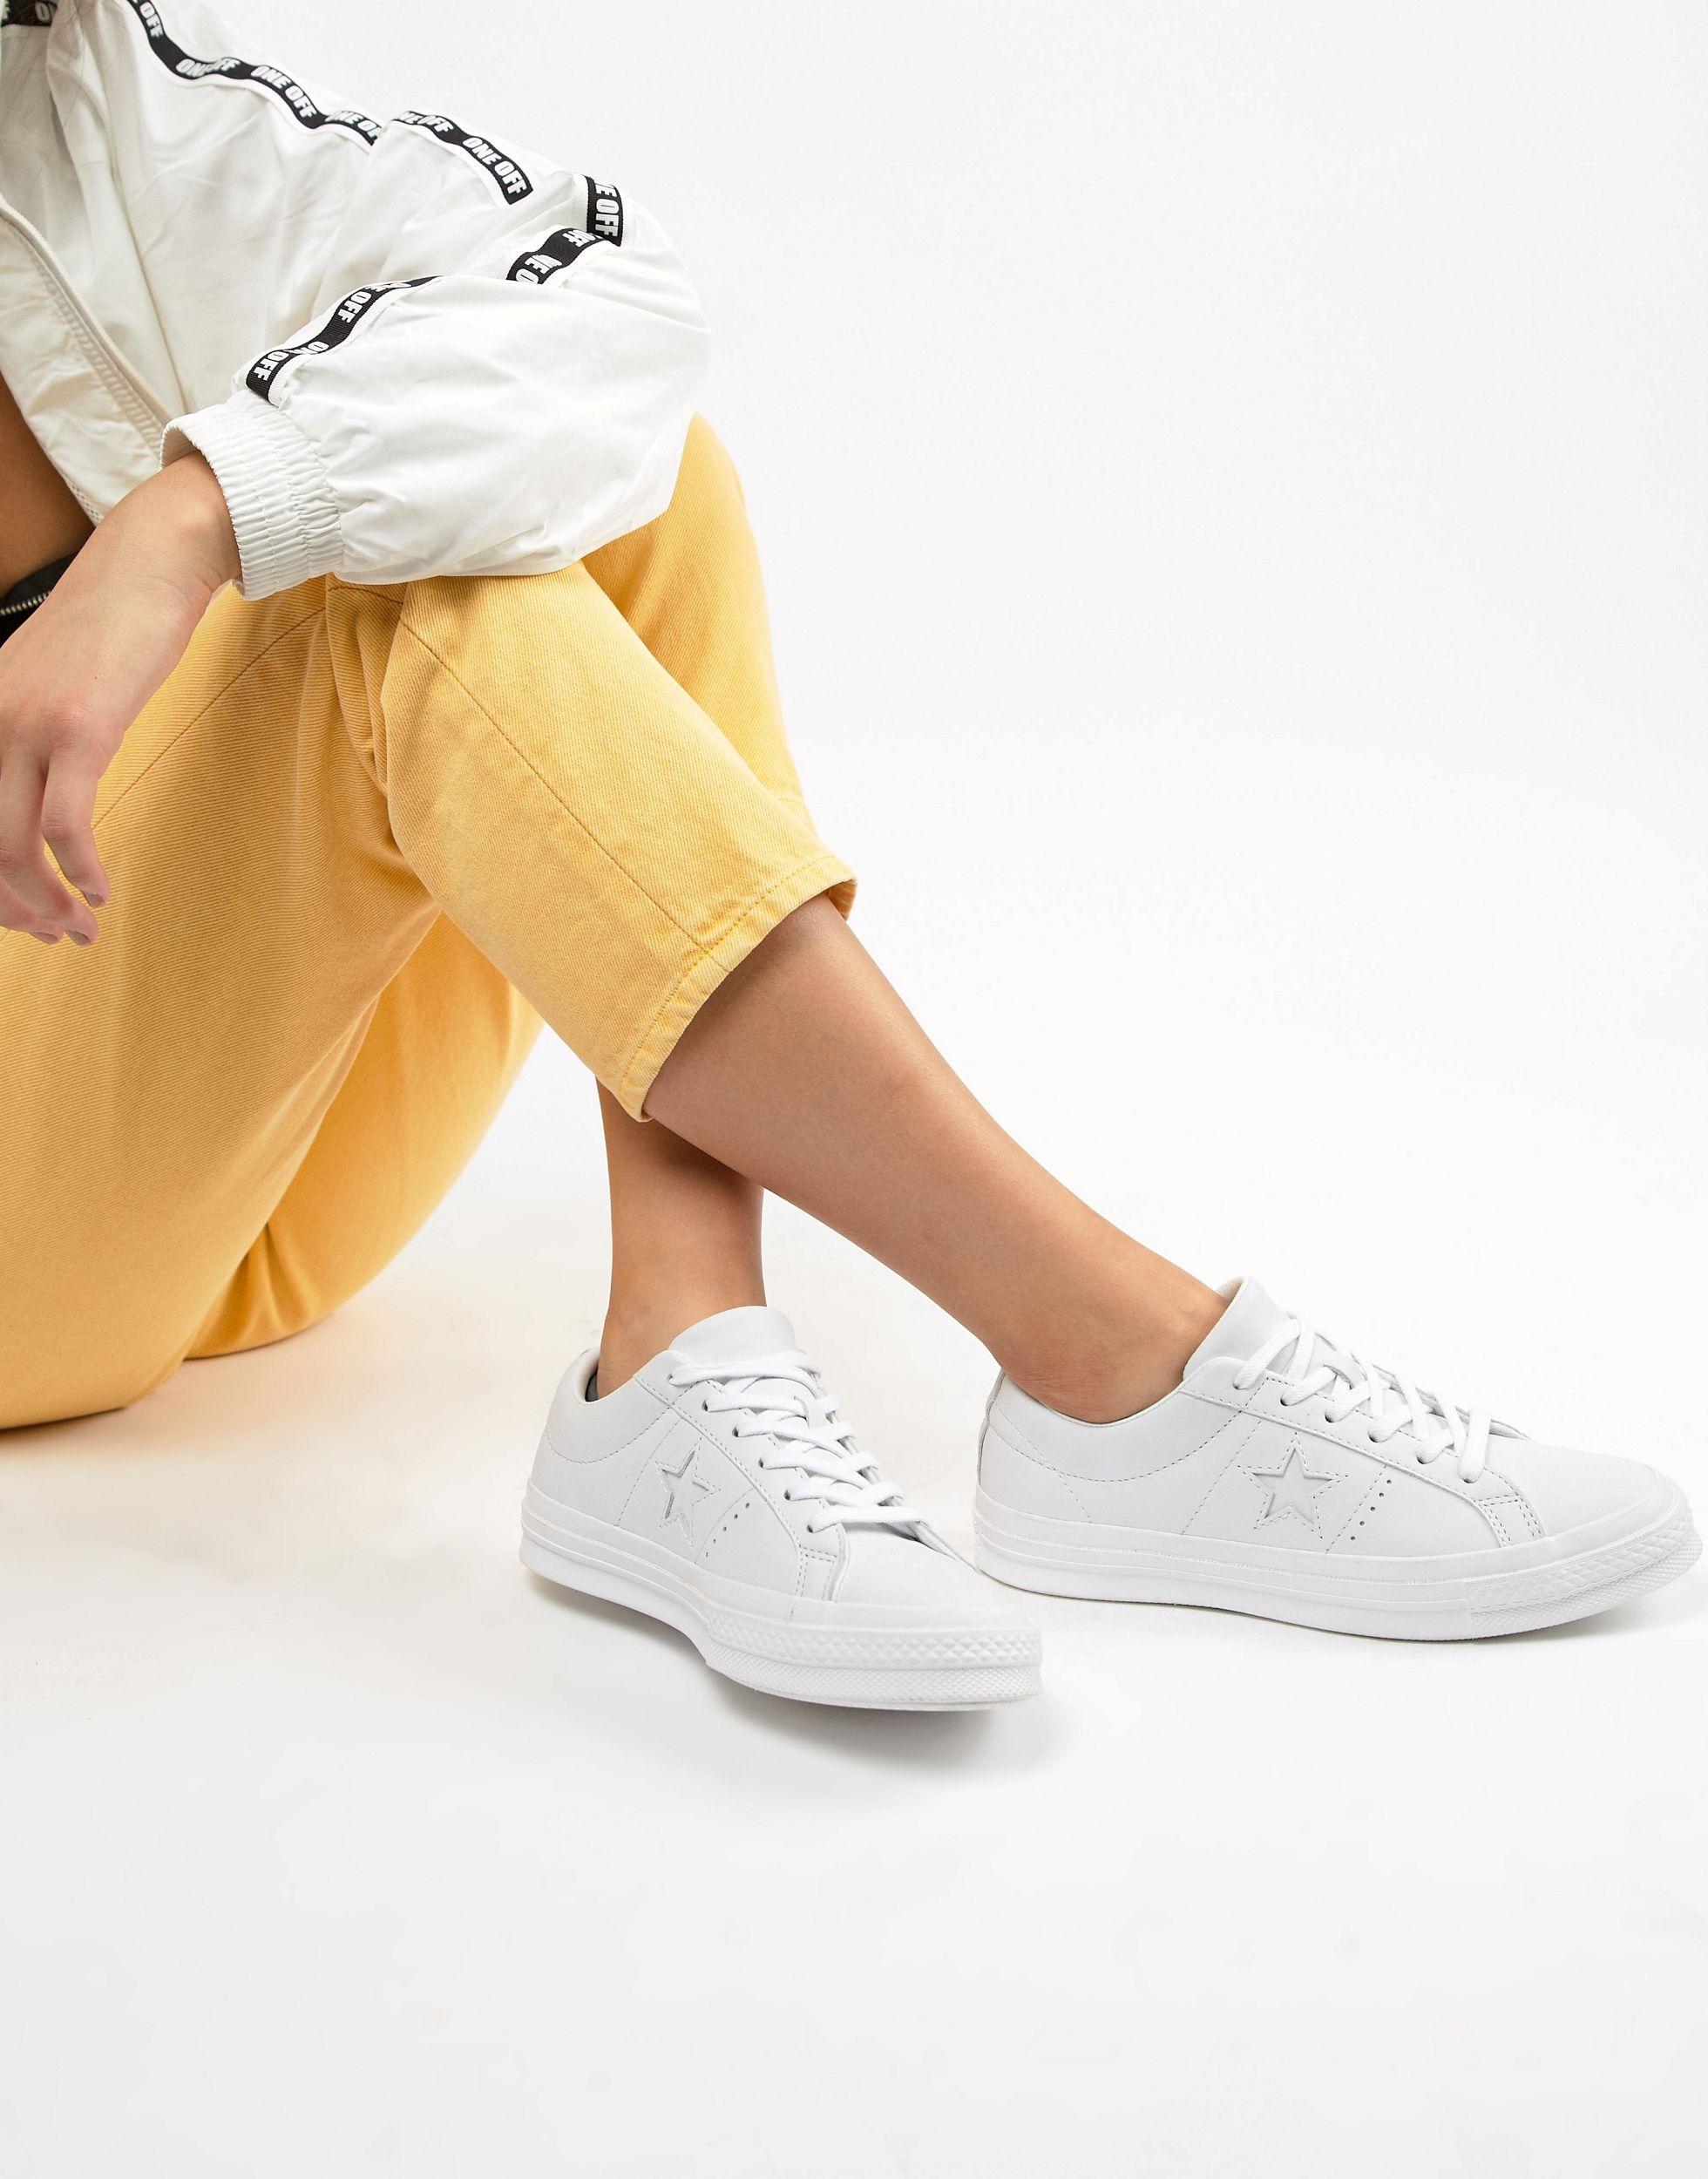 Converse One Star White Monochrome Leather Sneakers - Lyst